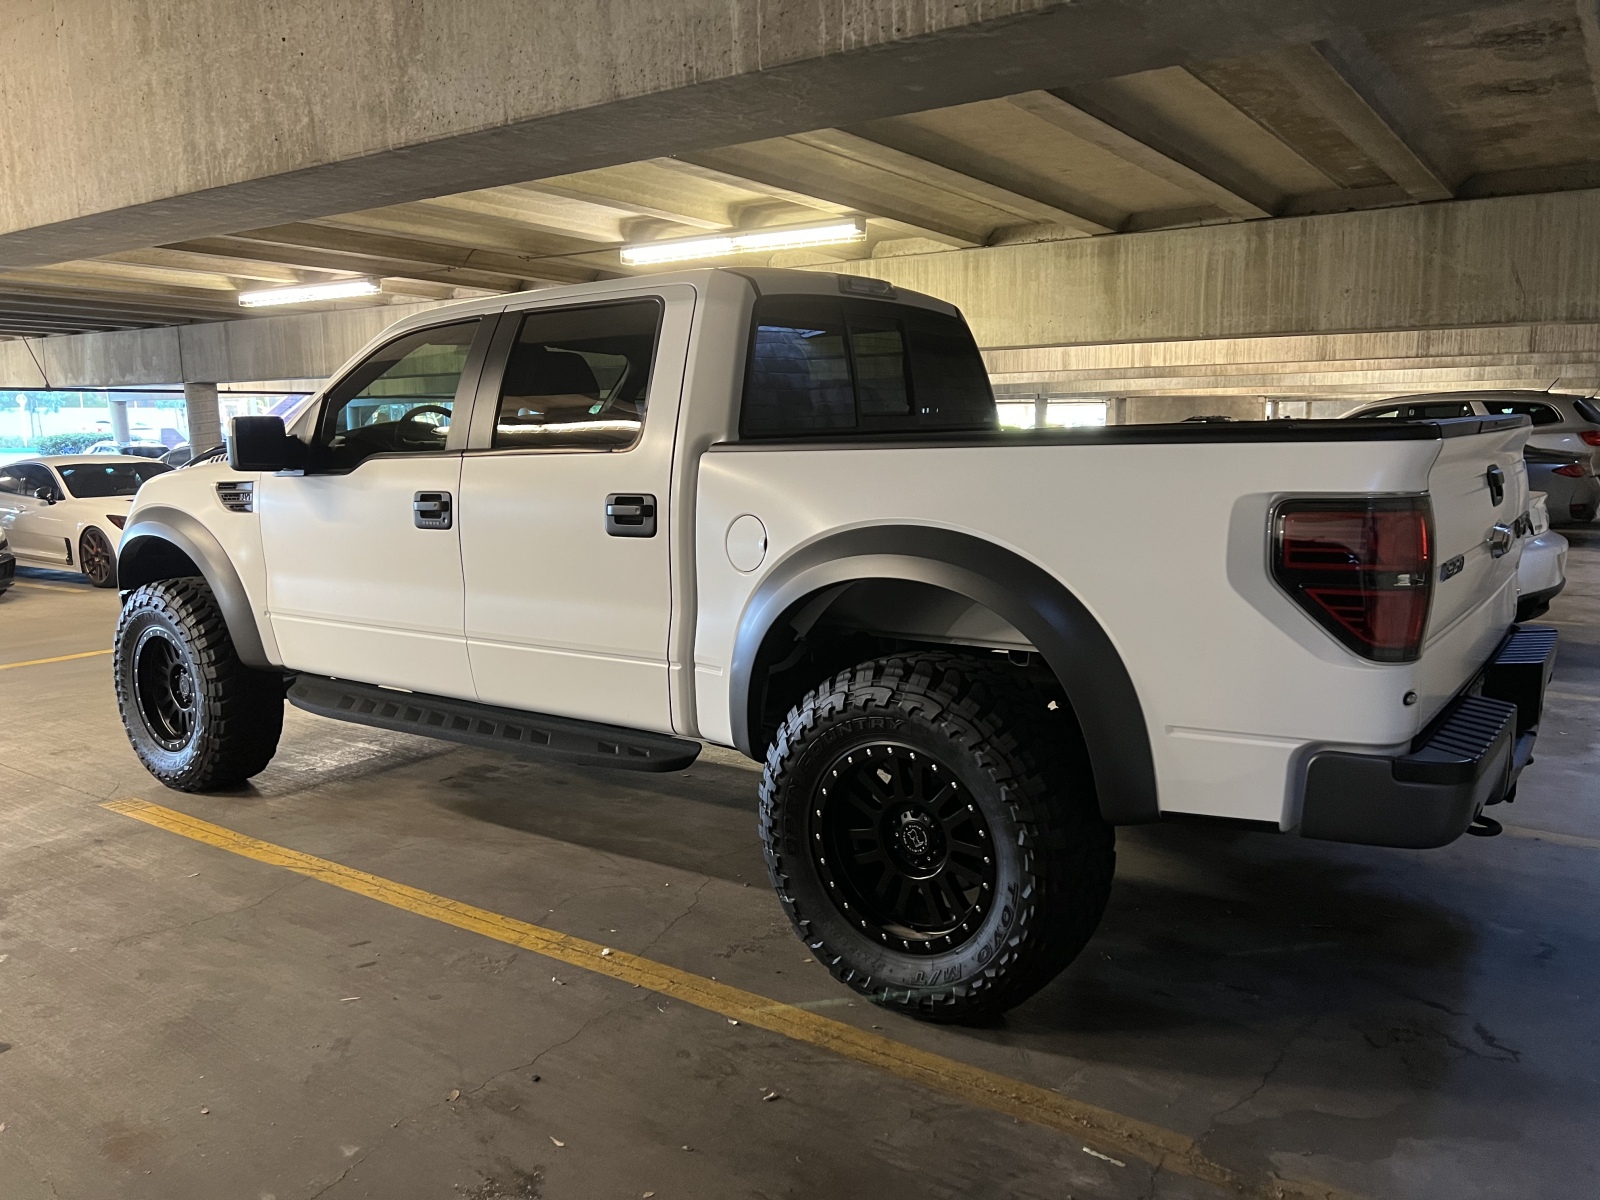 For Sale: PRICE DROP! | 2014 Ford SVT Raptor | ONLY 8,050 MILES!!! - photo2